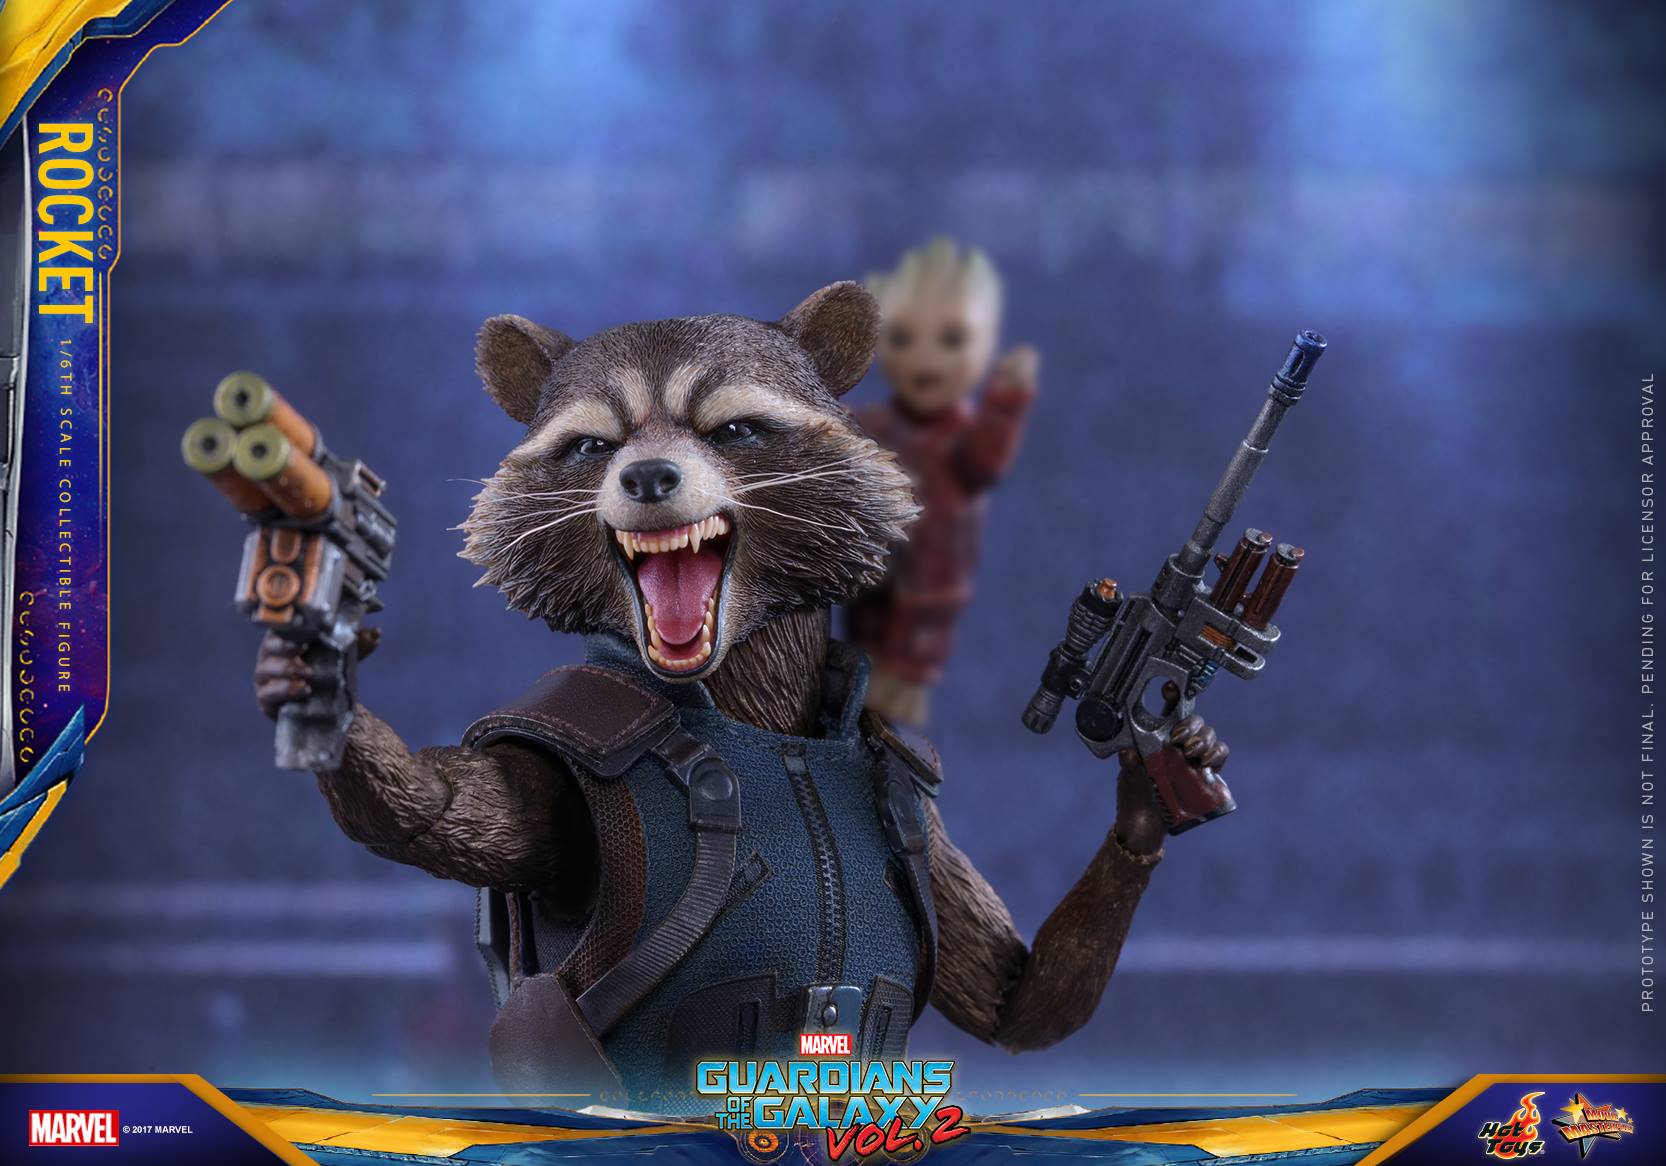 GOTG Vol. 2 - 1/6th scale Rocket Collectible Figure